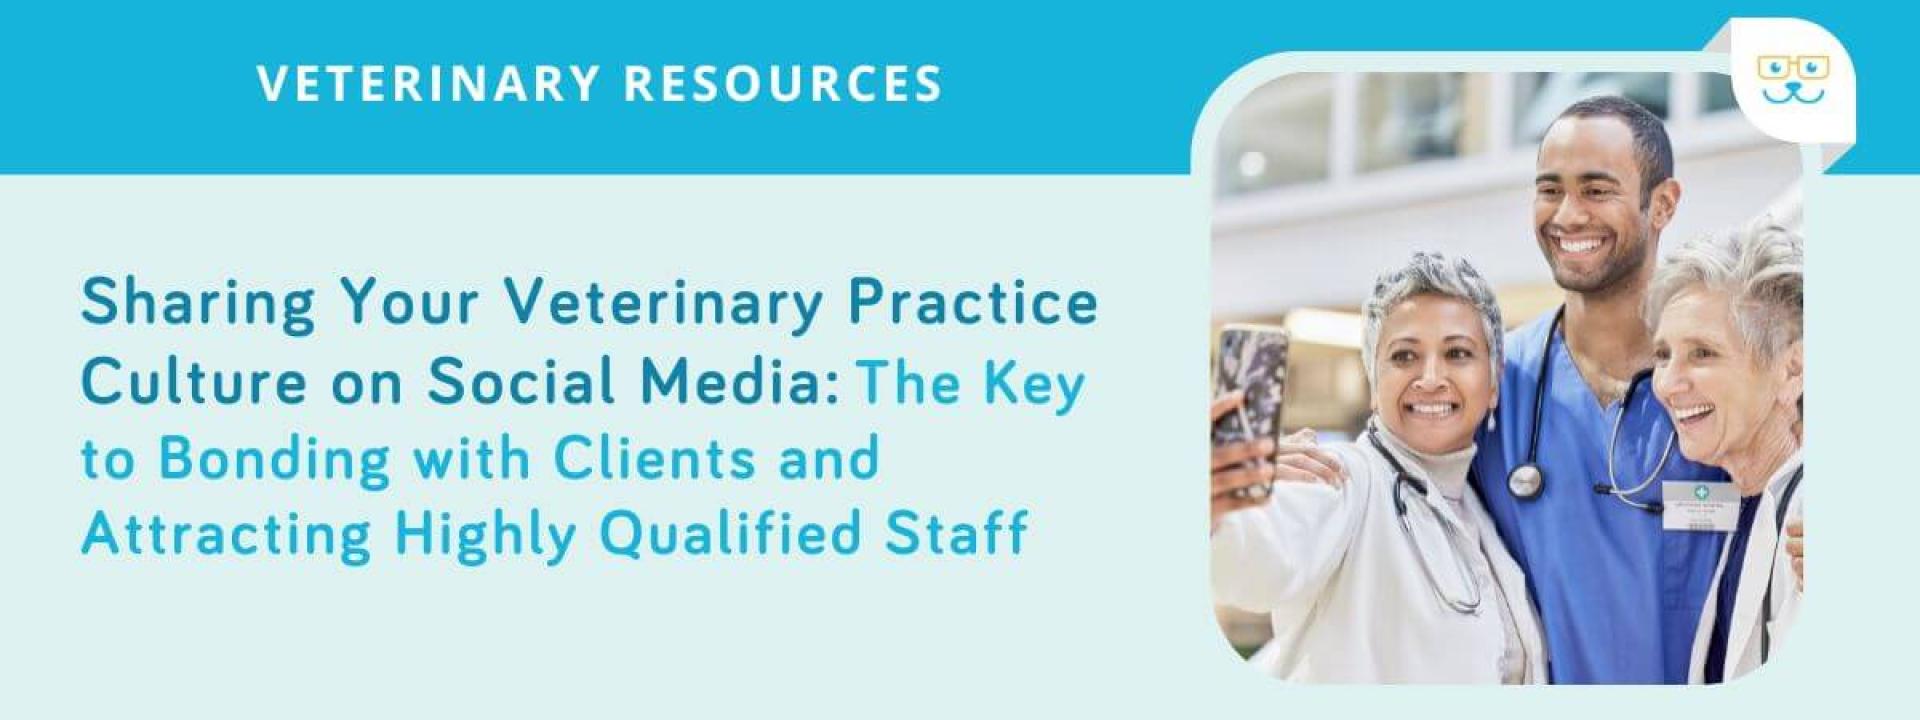 Sharing Your Veterinary Practice Culture on Social Media: The Key to Bonding with Clients and Attracting Highly Qualified Staff